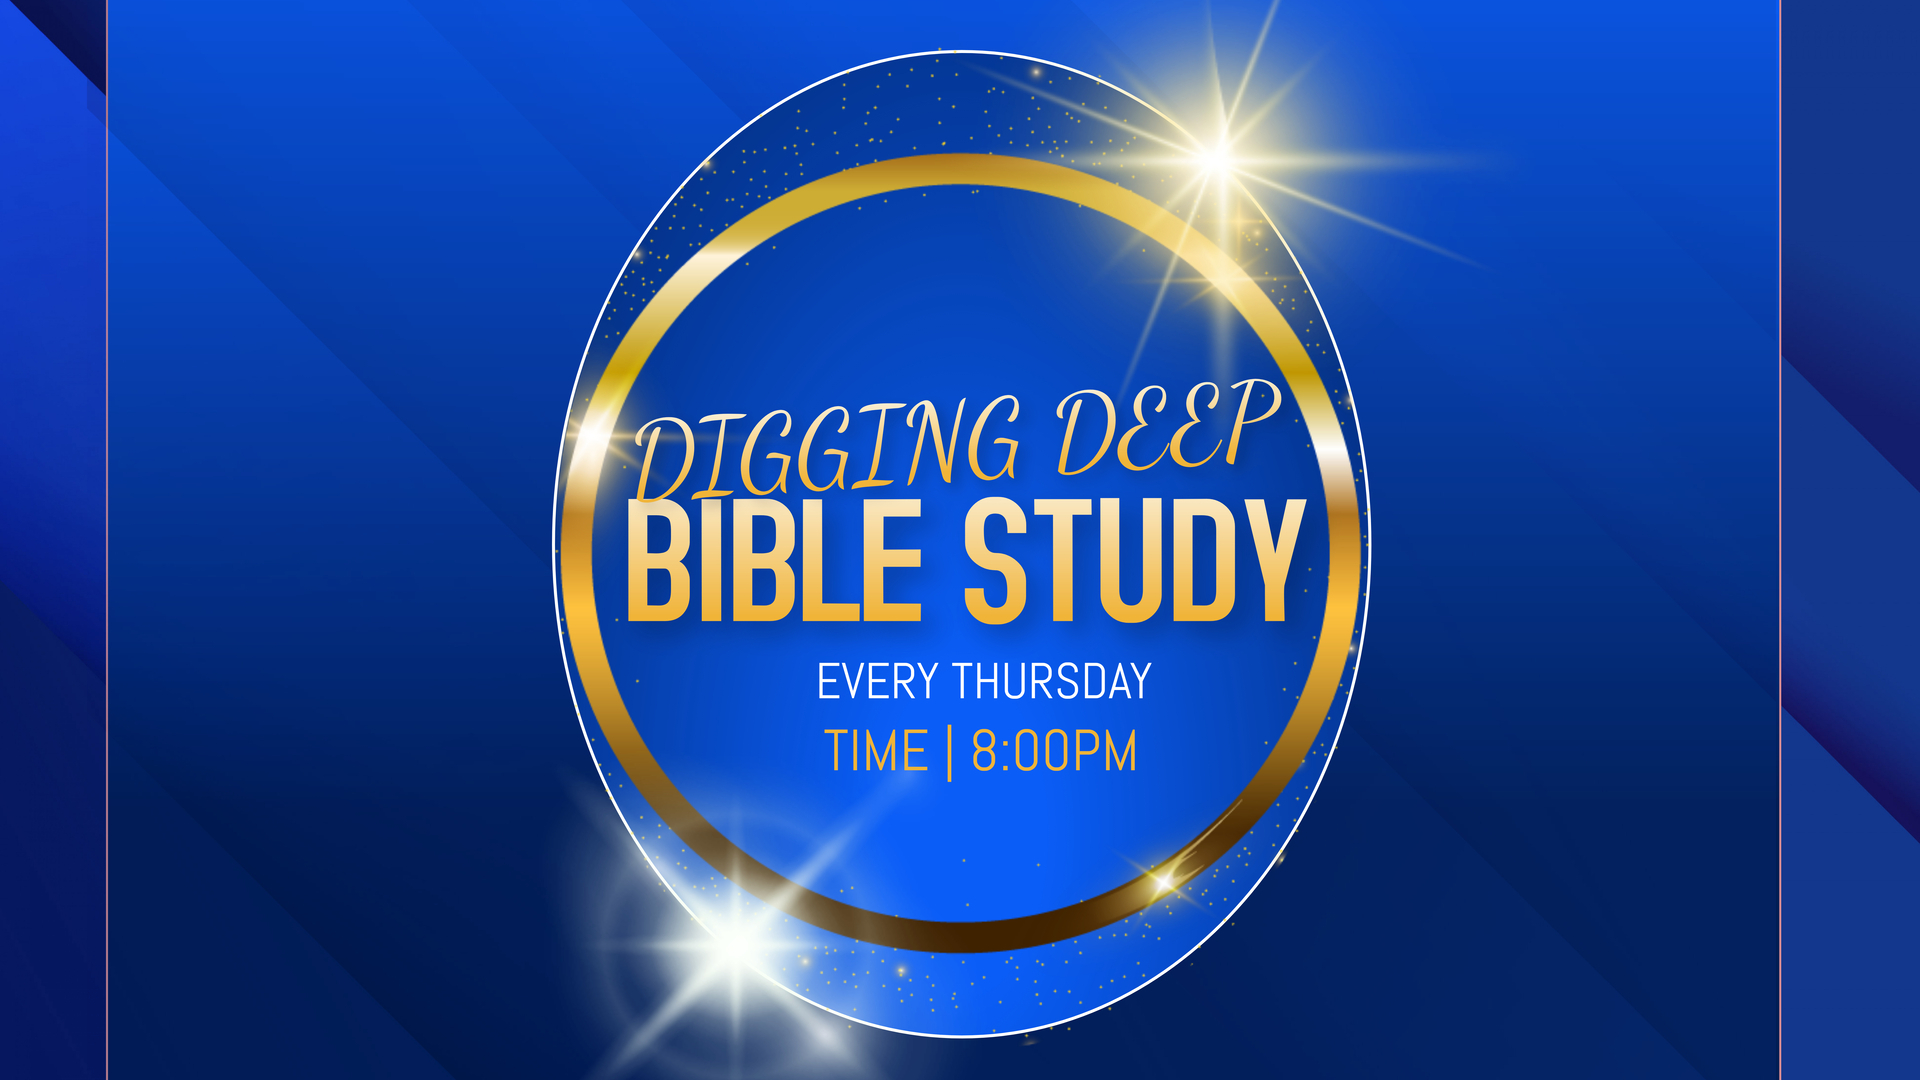 daily bible study program for